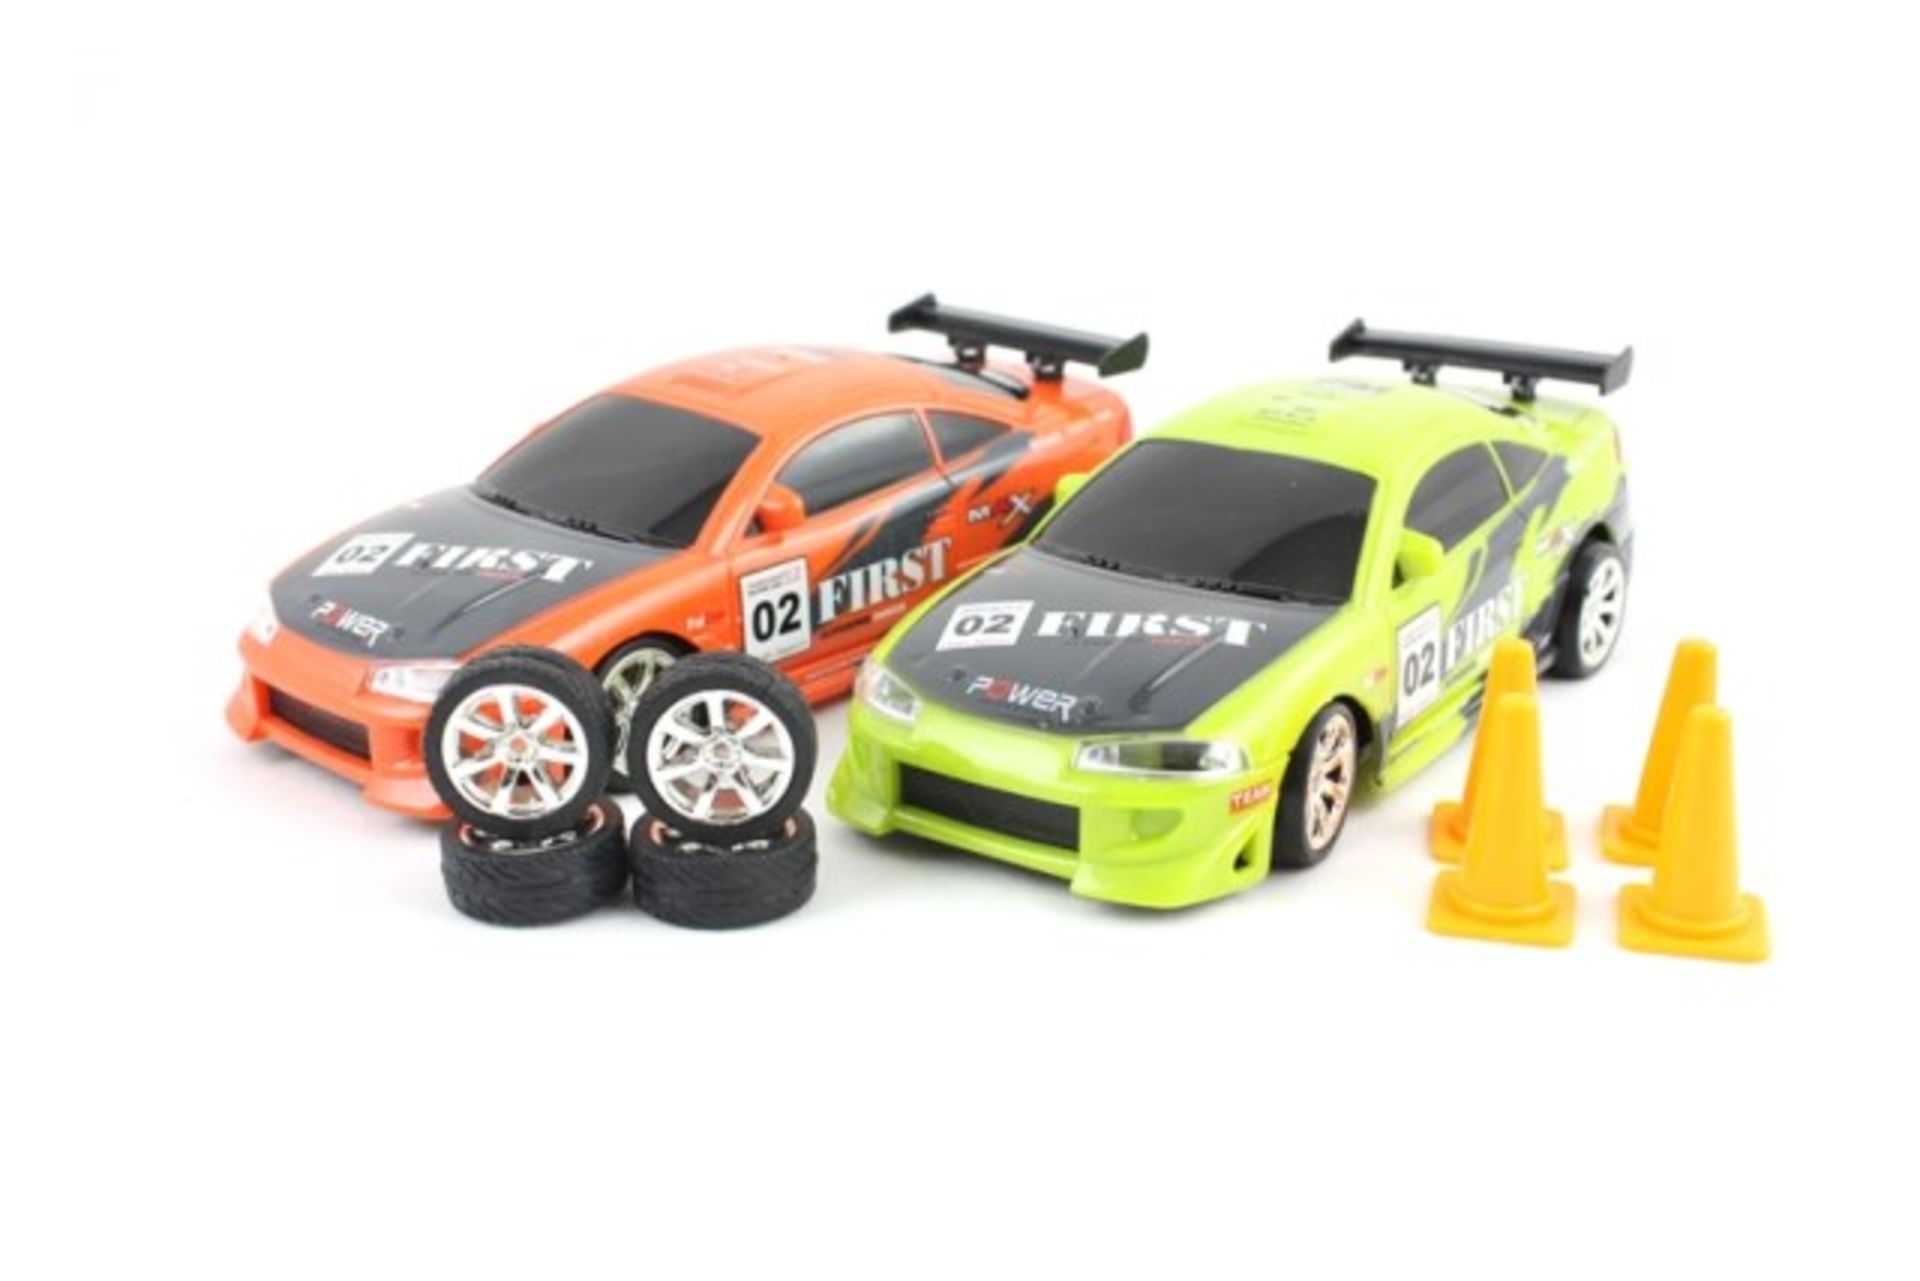 V Brand New 1:24 scale Mitsubishi Eclipse Drift Racer Car X 2 YOUR BID PRICE TO BE MULTIPLIED BY